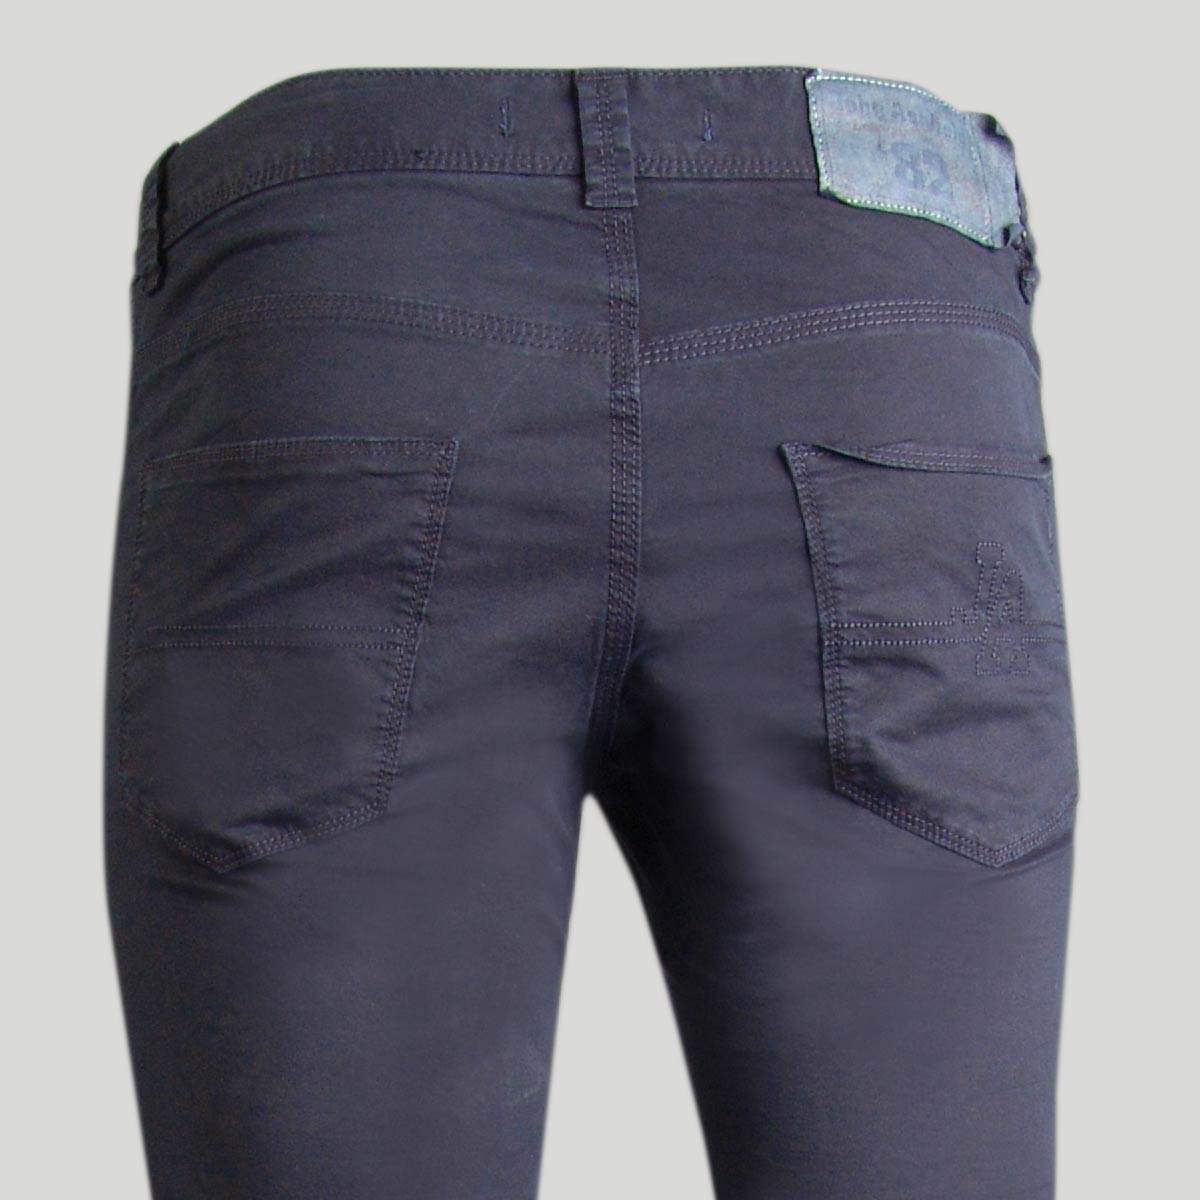 Men's Jeans in cotton stretch